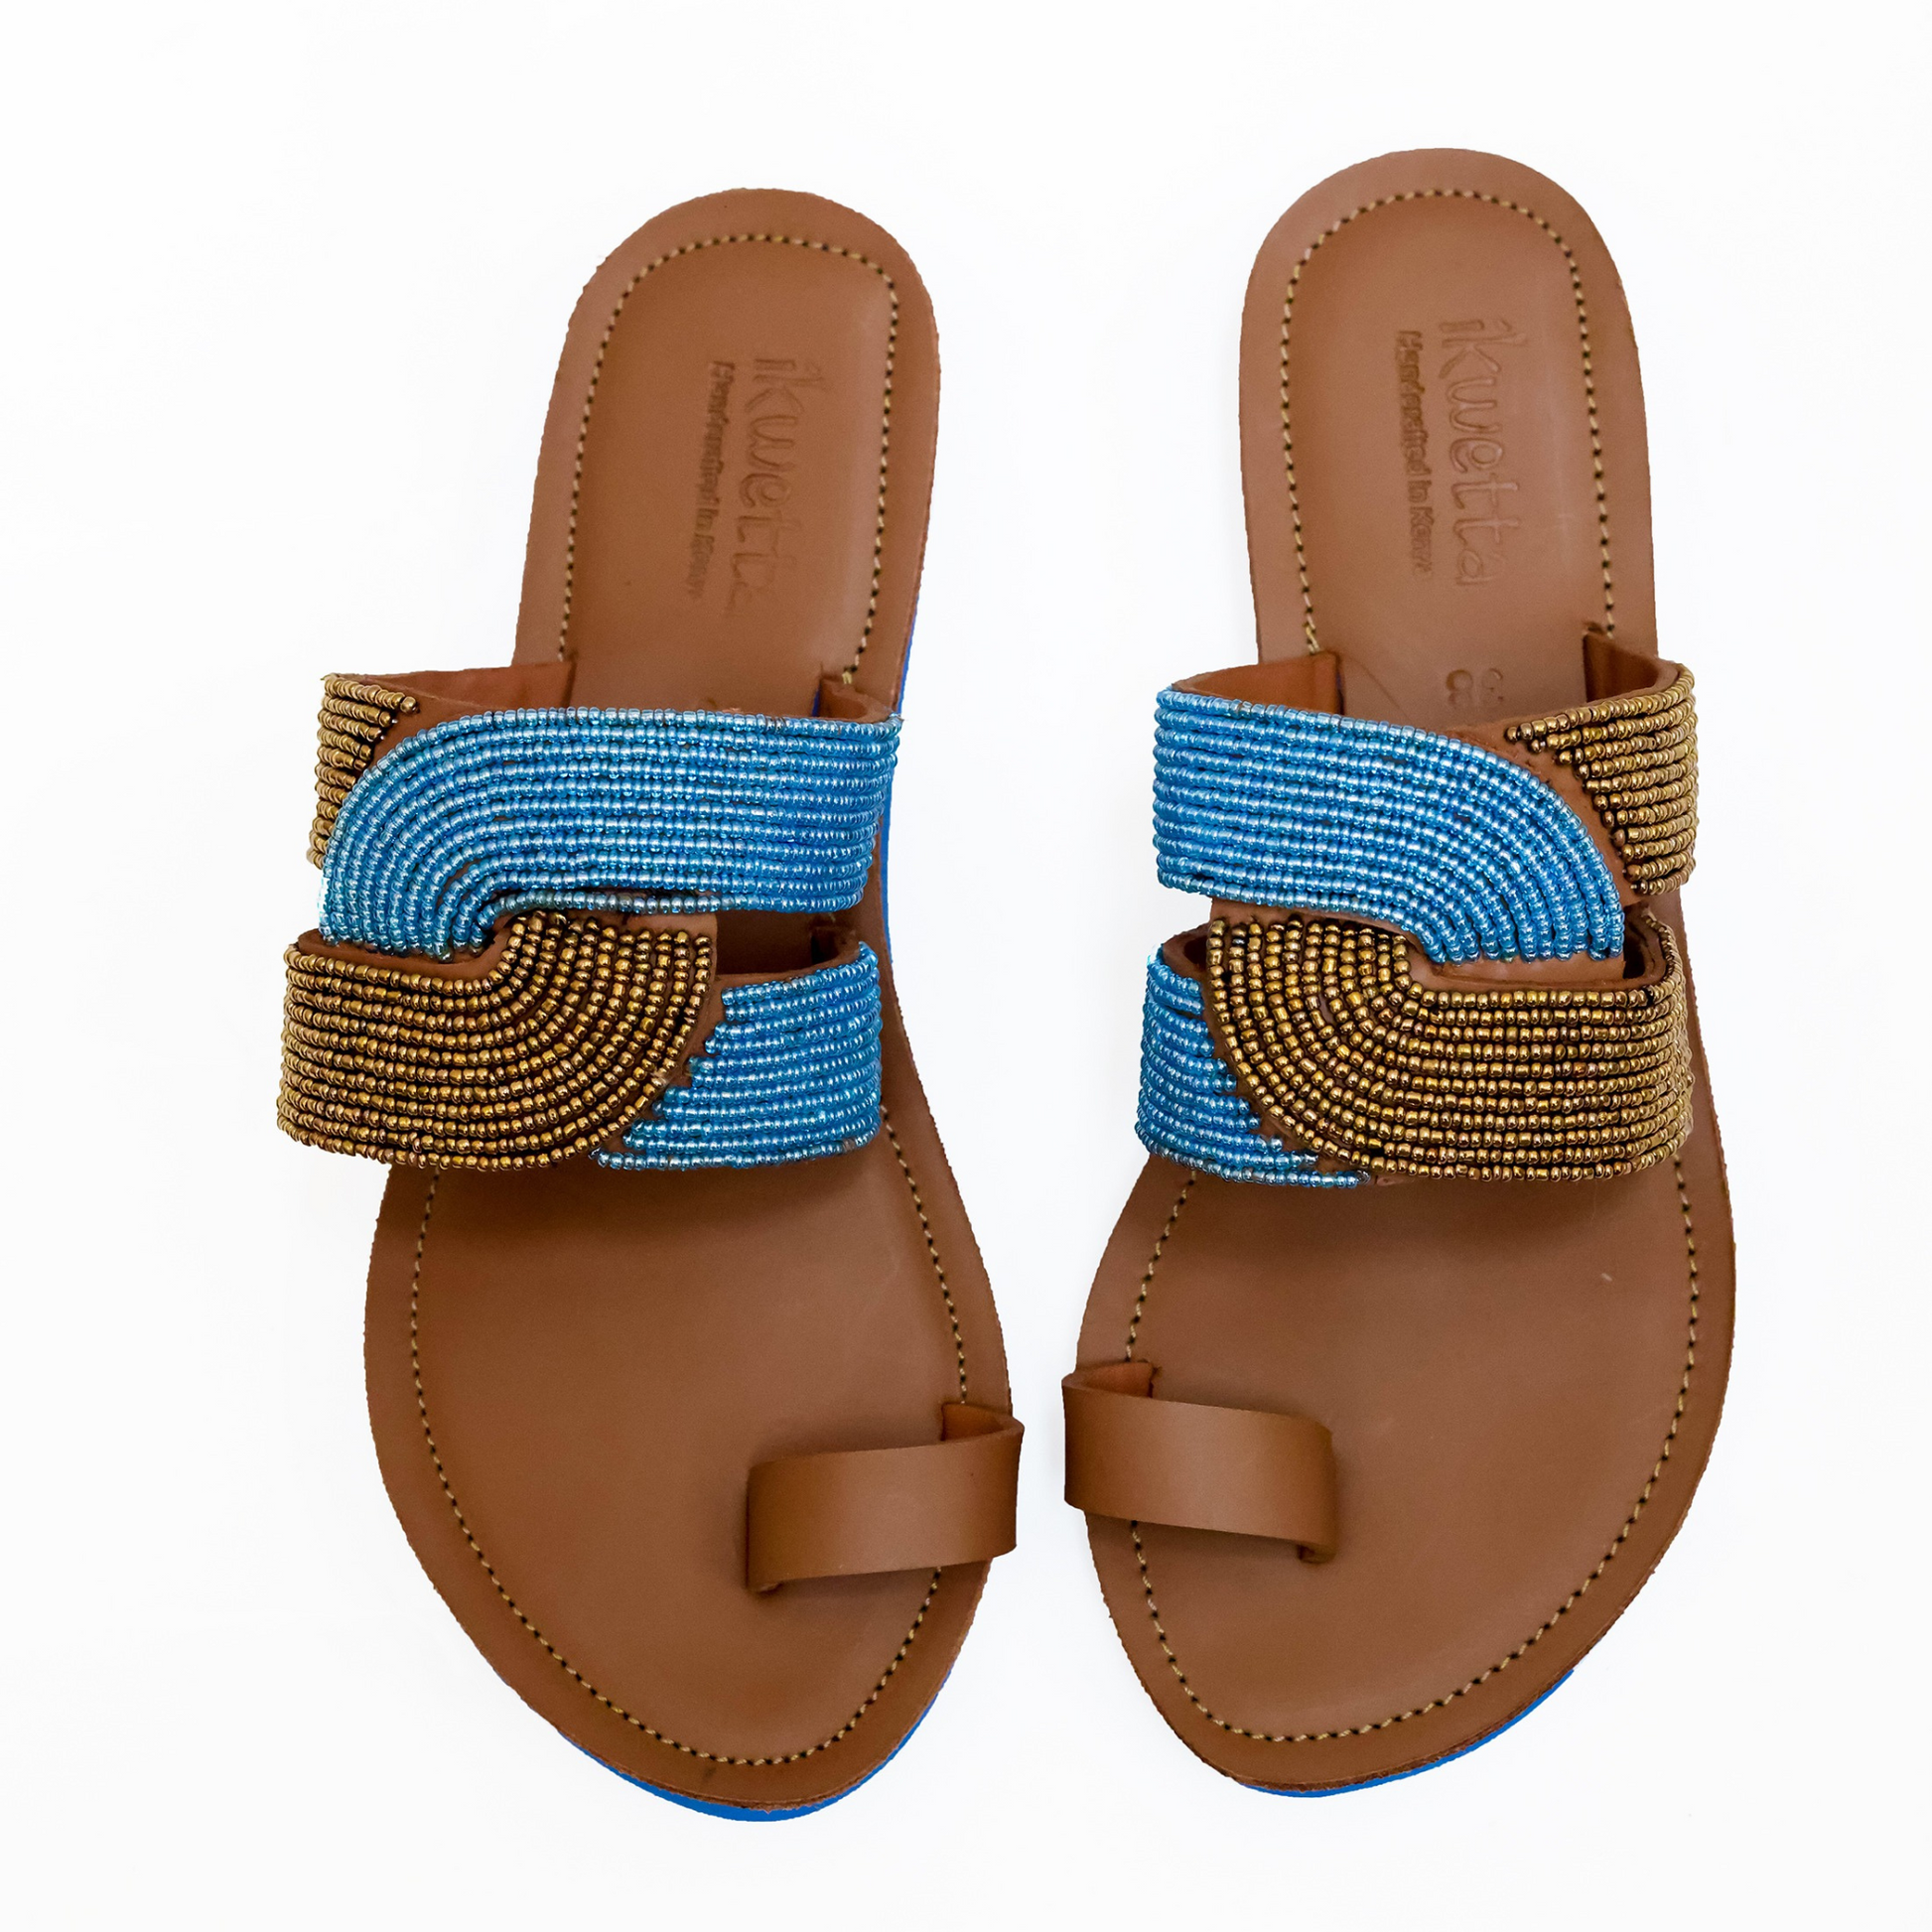 Rift sandals in caramel smooth leather with a toe strap and beaded upper strap